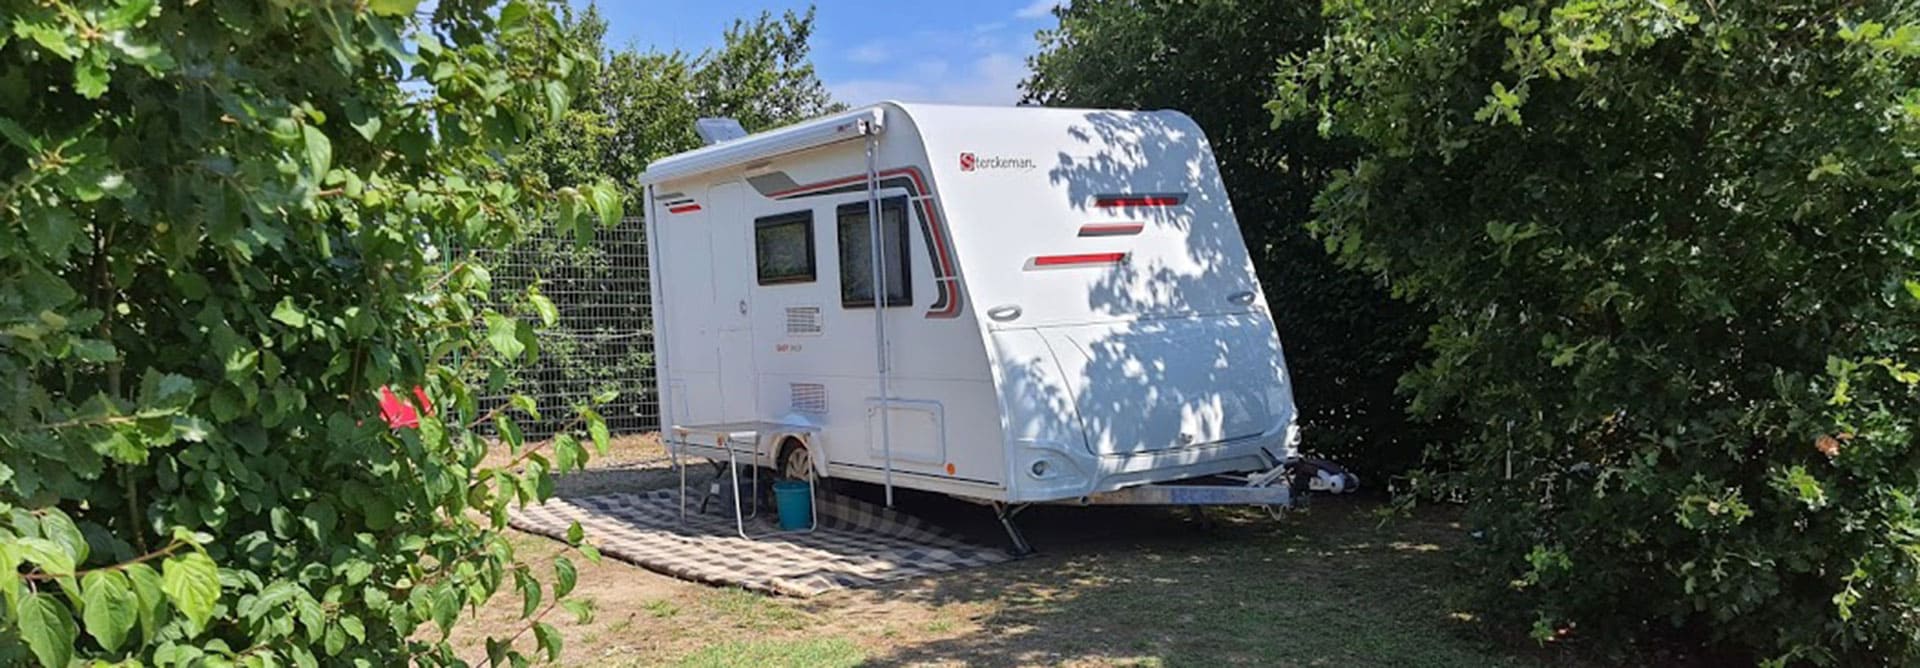 Pitch for motorhome at Escale Occitane, campsite near Carcassonne